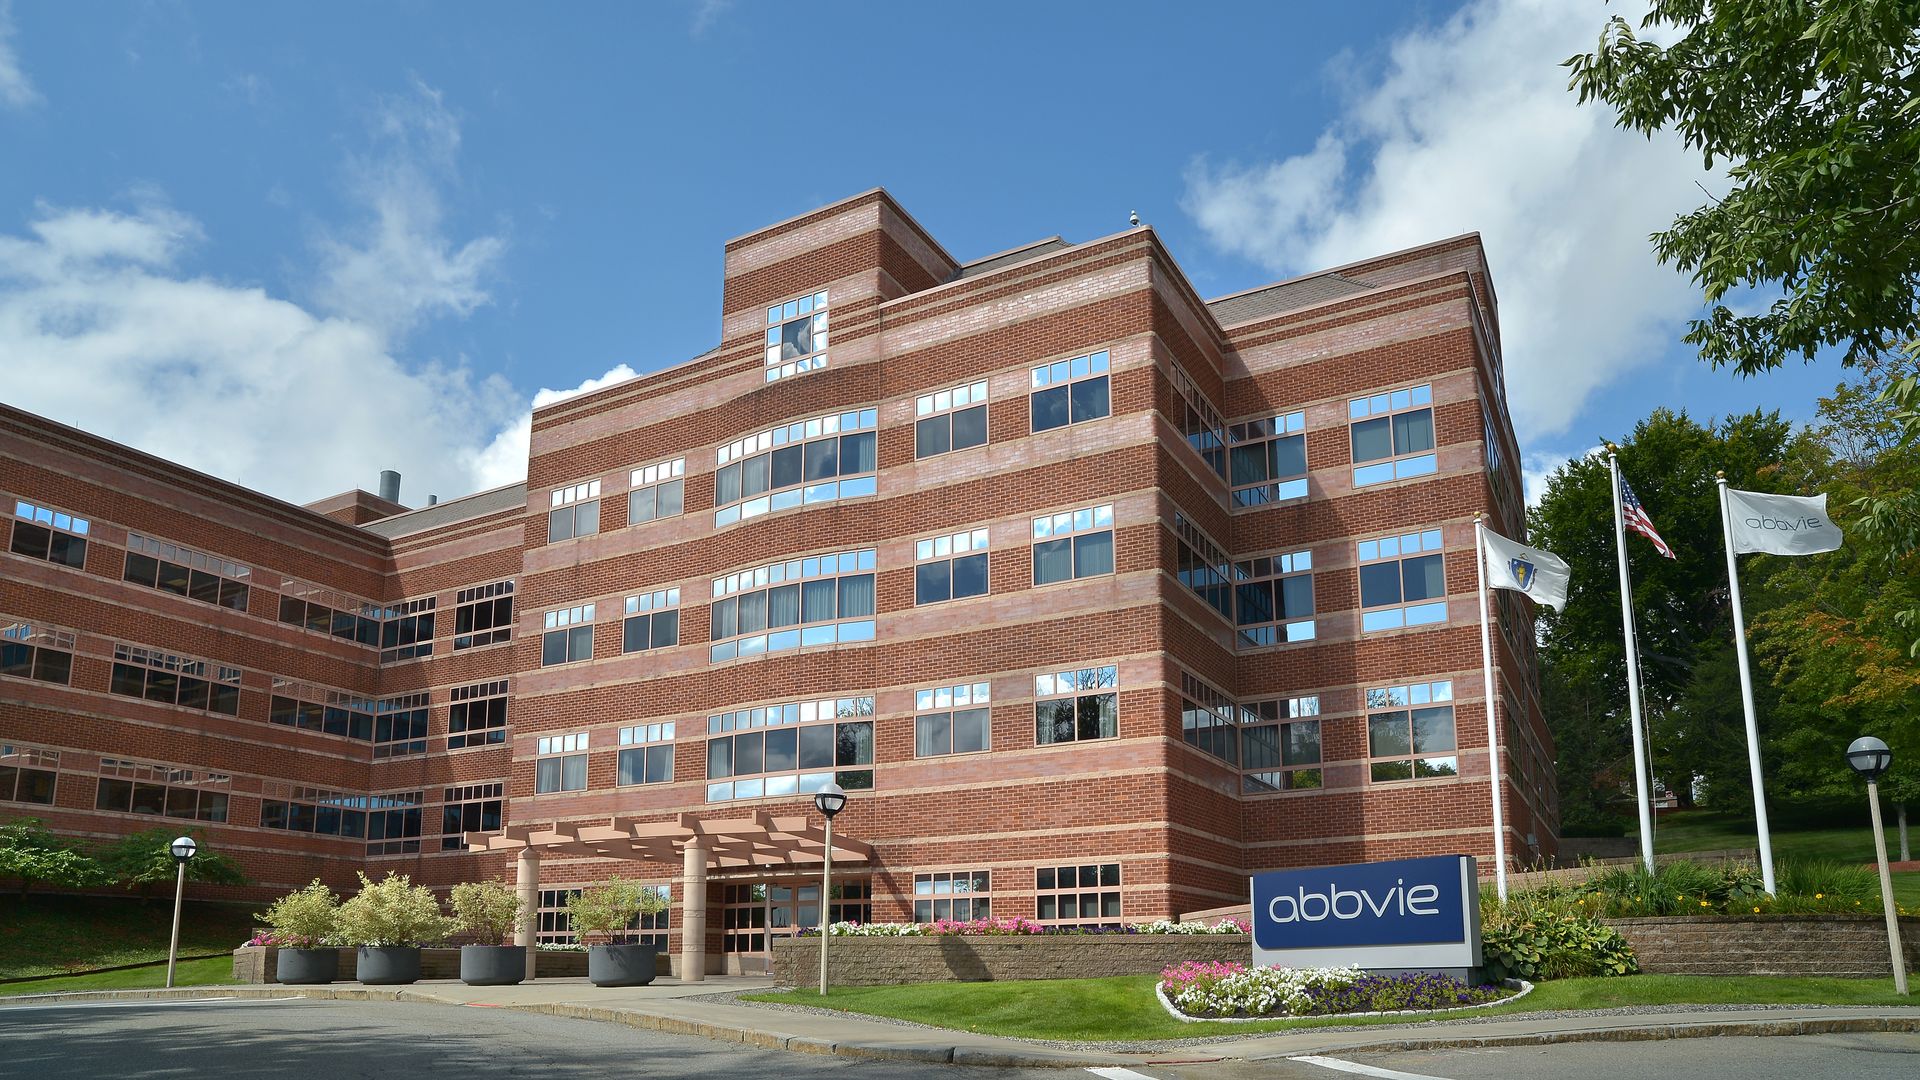 Multi-story AbbVie building with flags outside